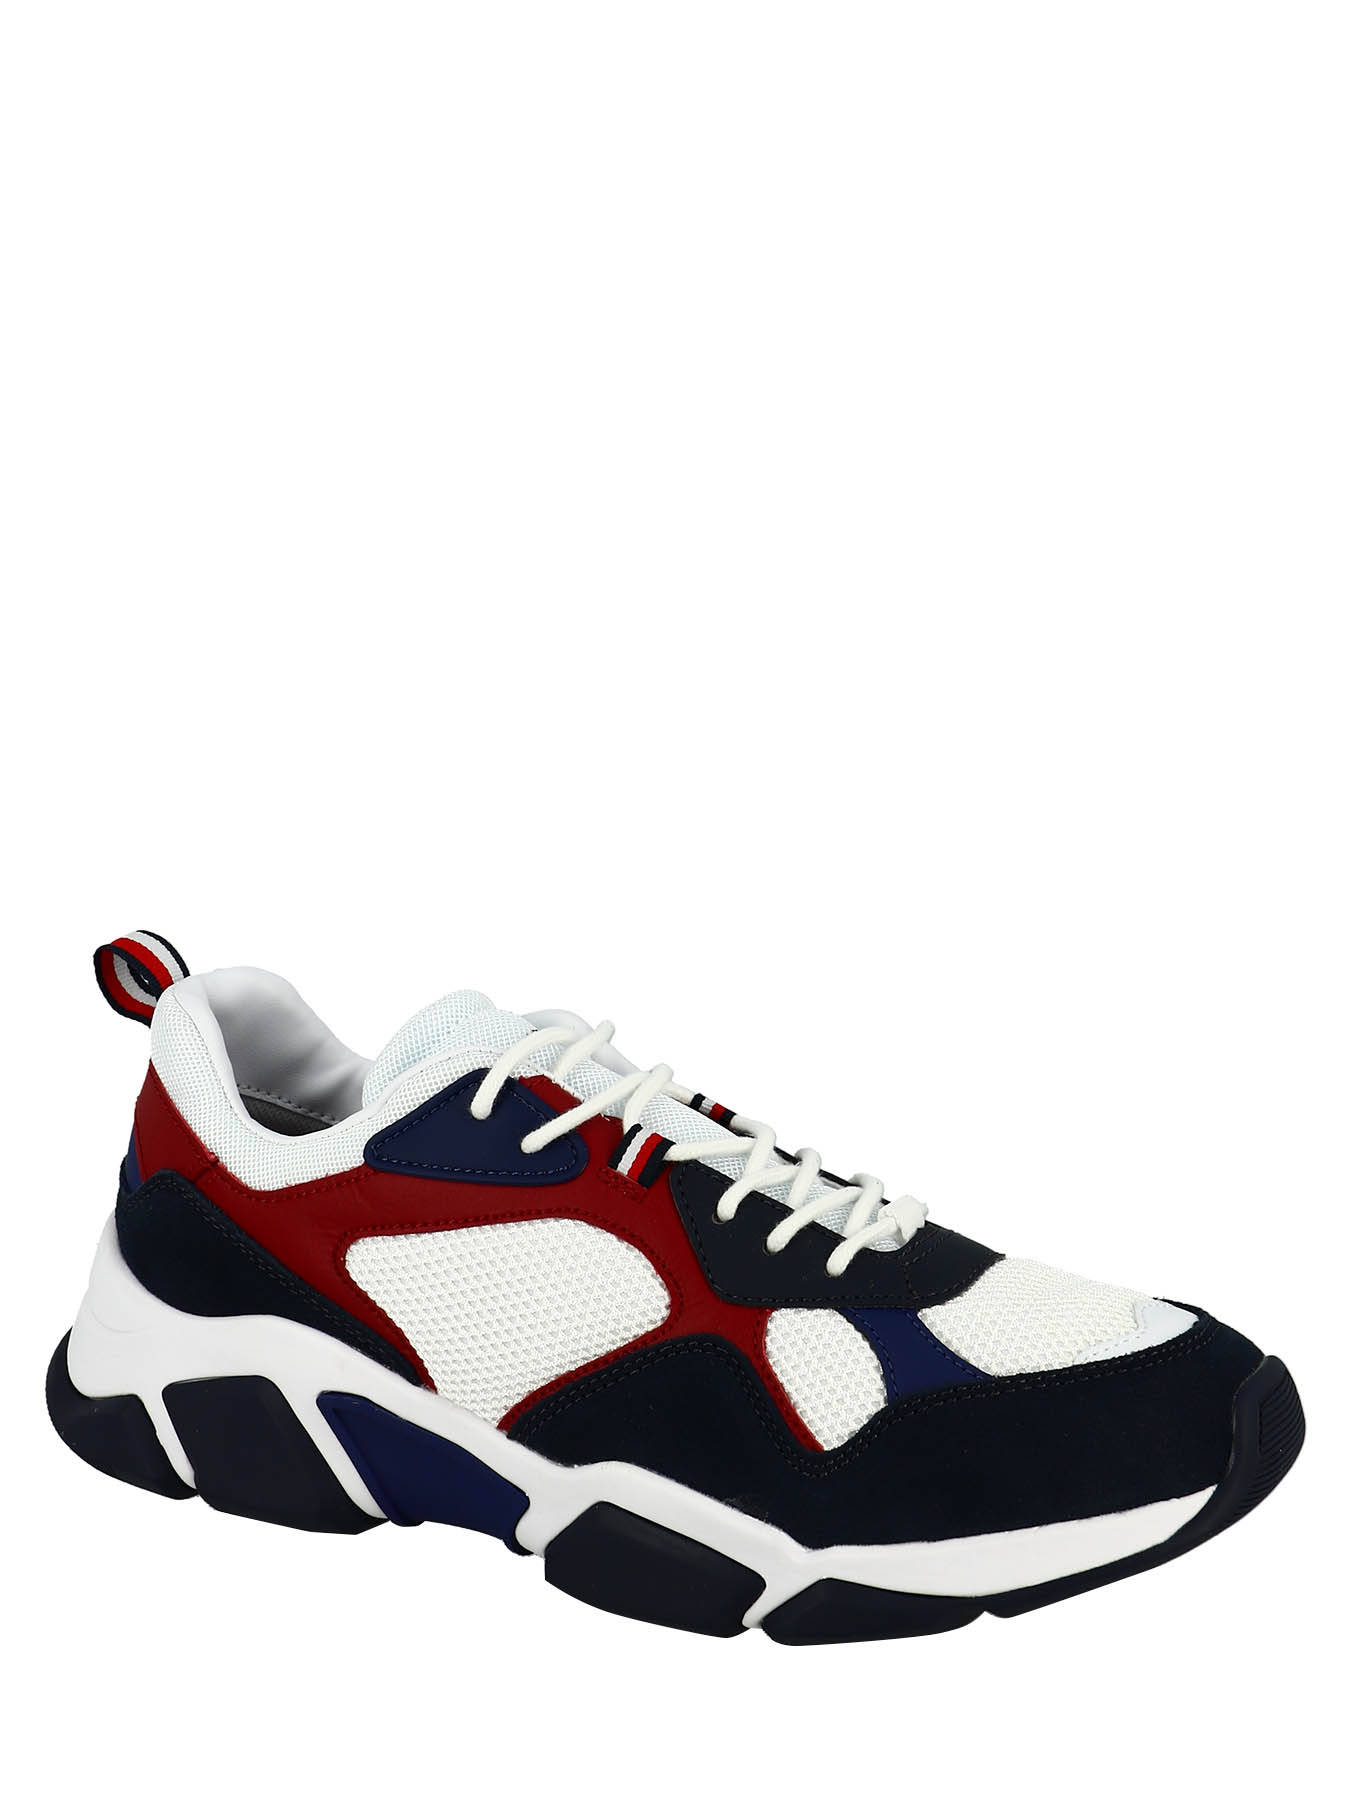 tommy hilfiger sneakers outlet